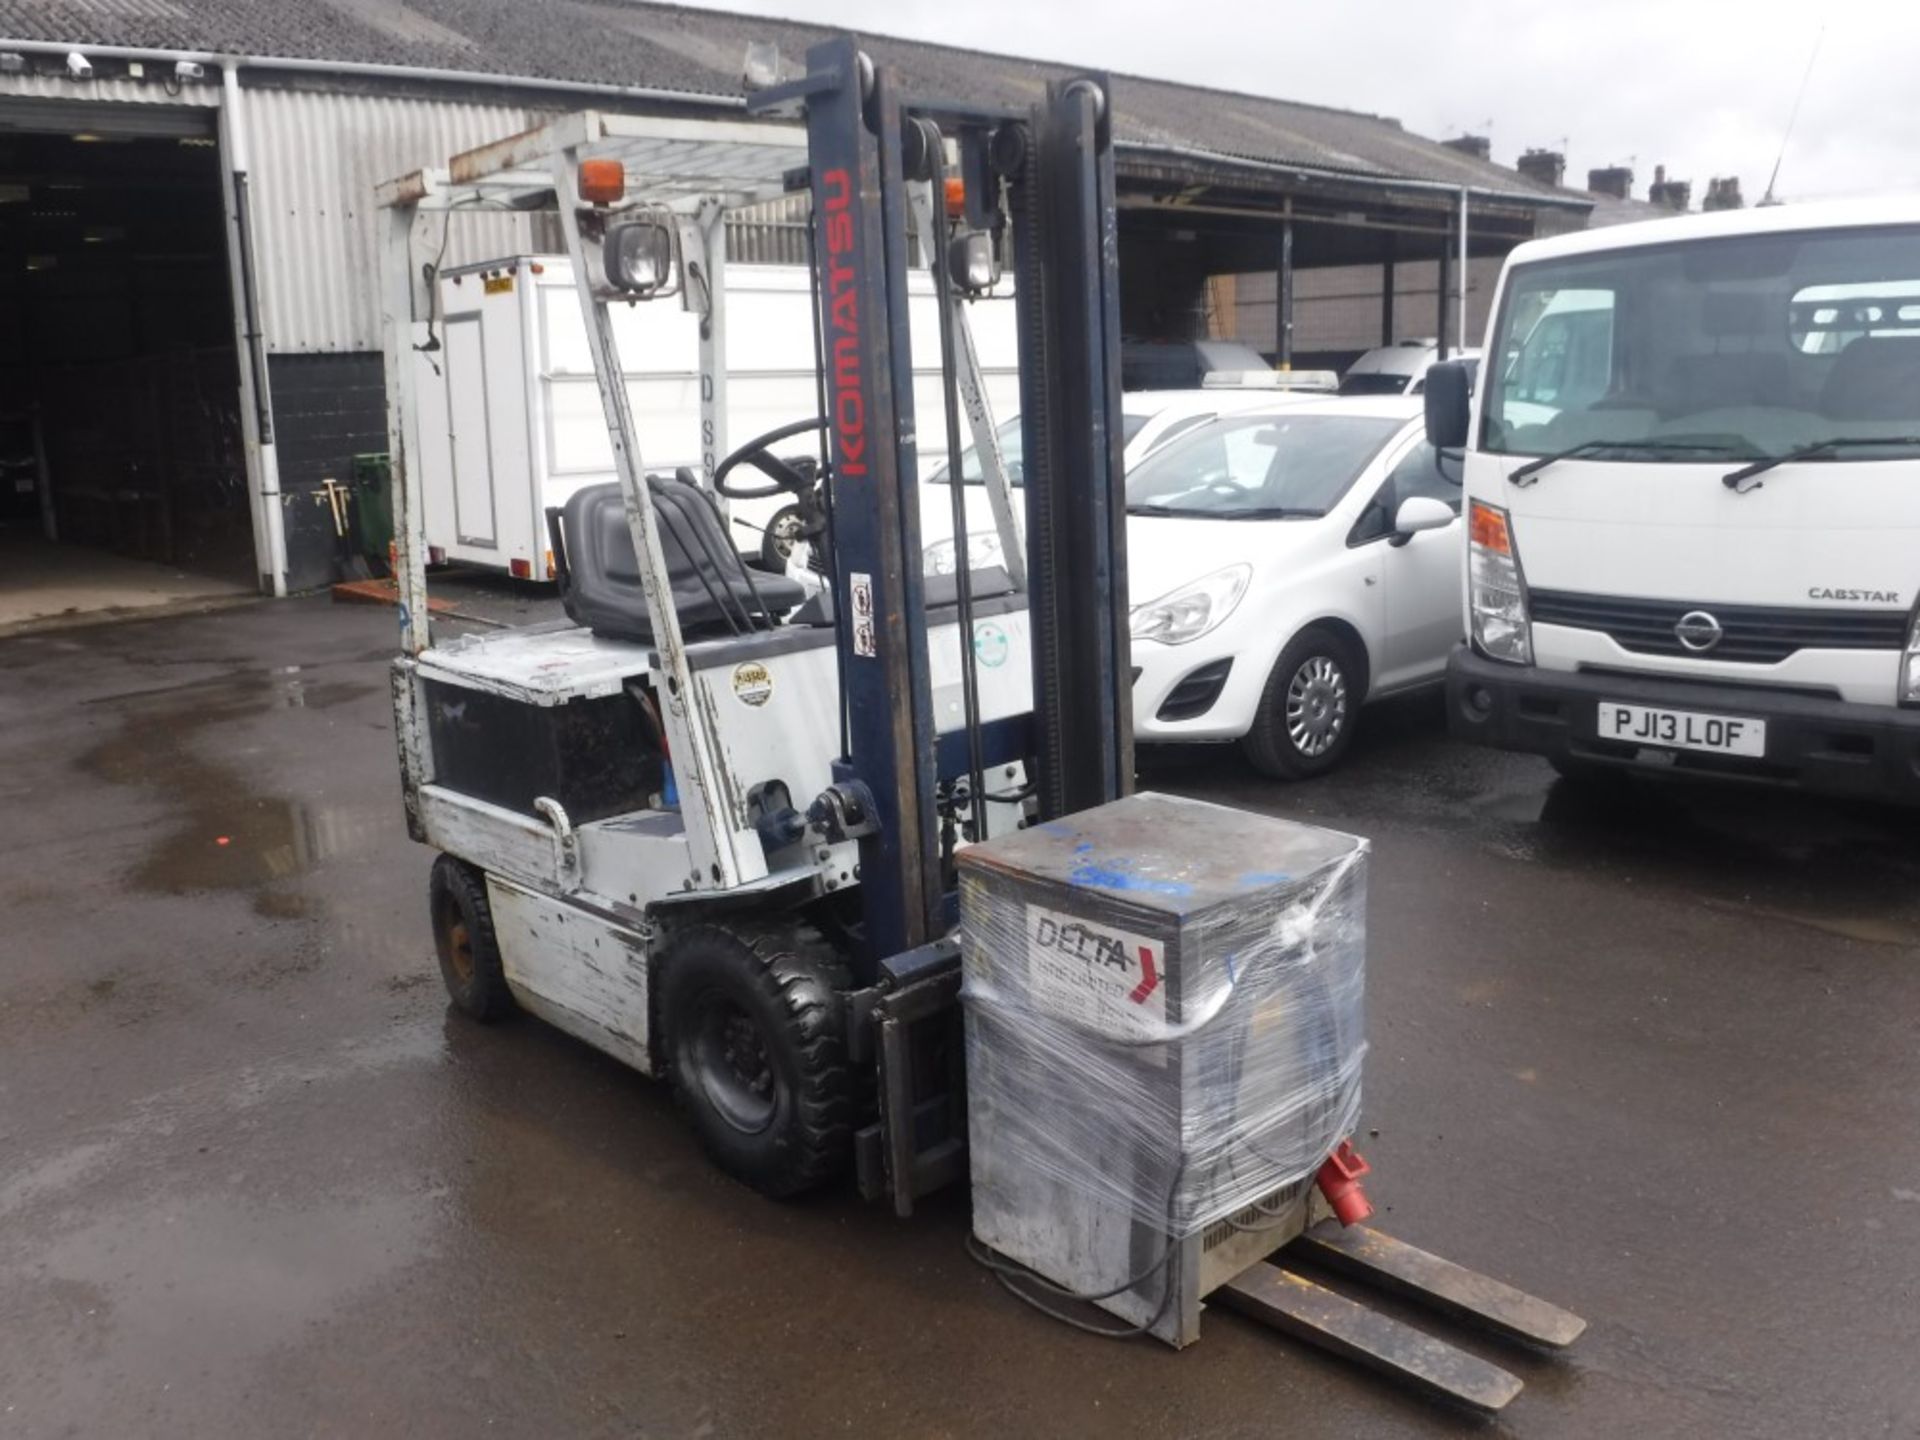 KOMATSU 1.5 TON ELECTRIC FORKLIFT WITH CHARGER, 14791 HOURS [NO VAT]